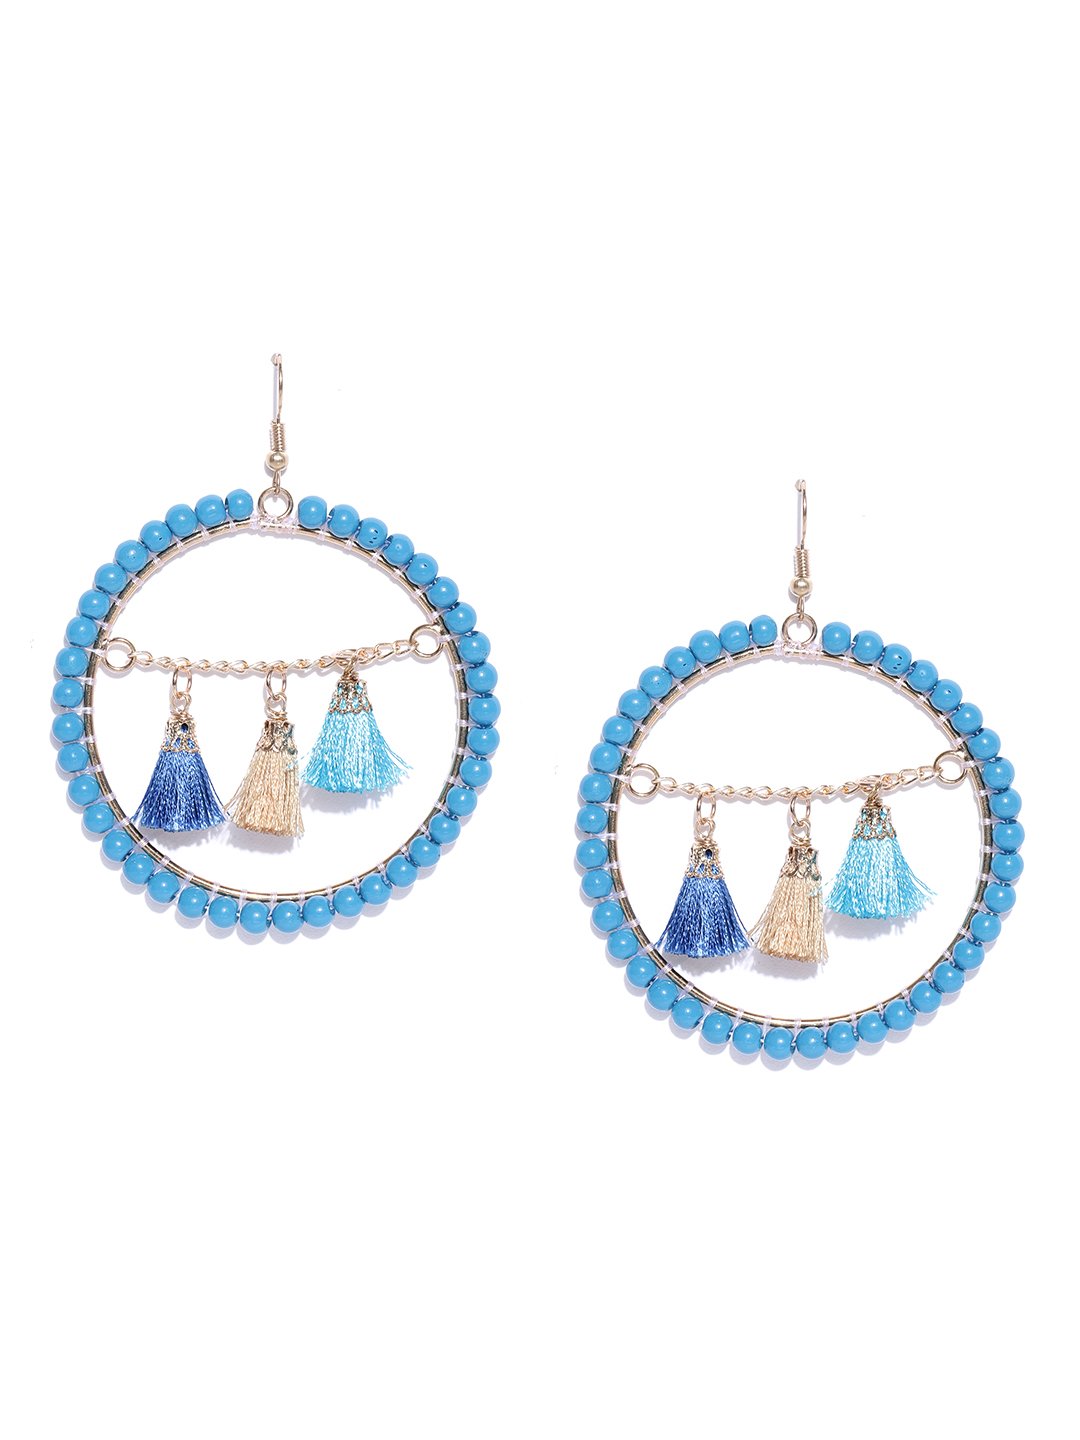 Blueberry gold and blue beads studded drop earring has tassel